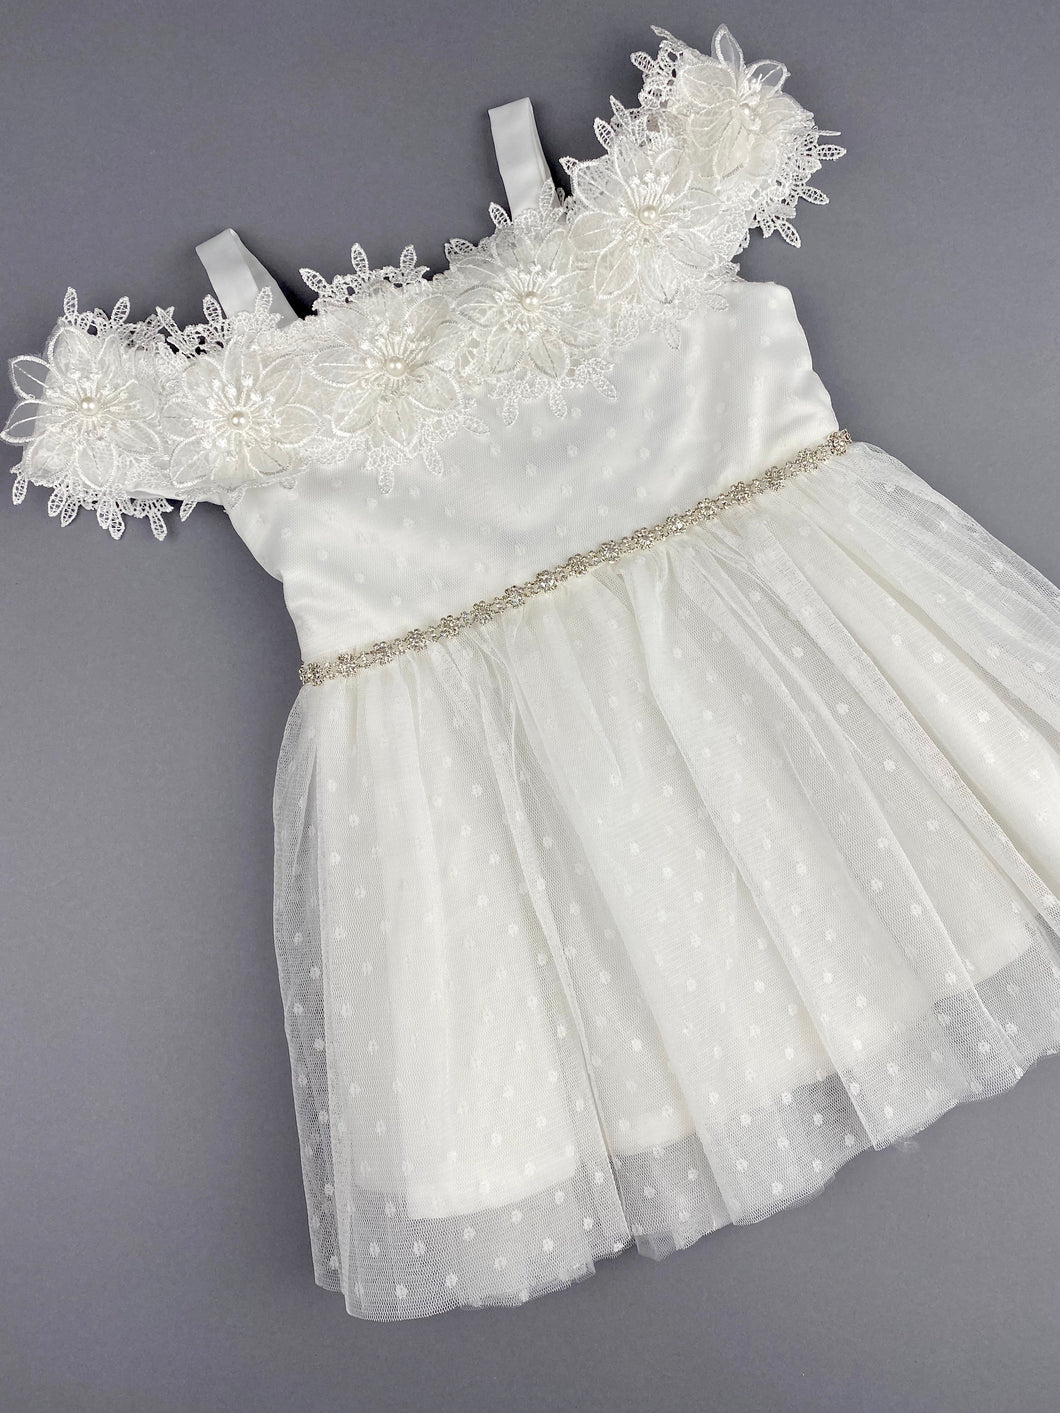 Girls Christening Baptismal Embroidered Dress 45 with Rhinestone Belt and Pearl Flowers